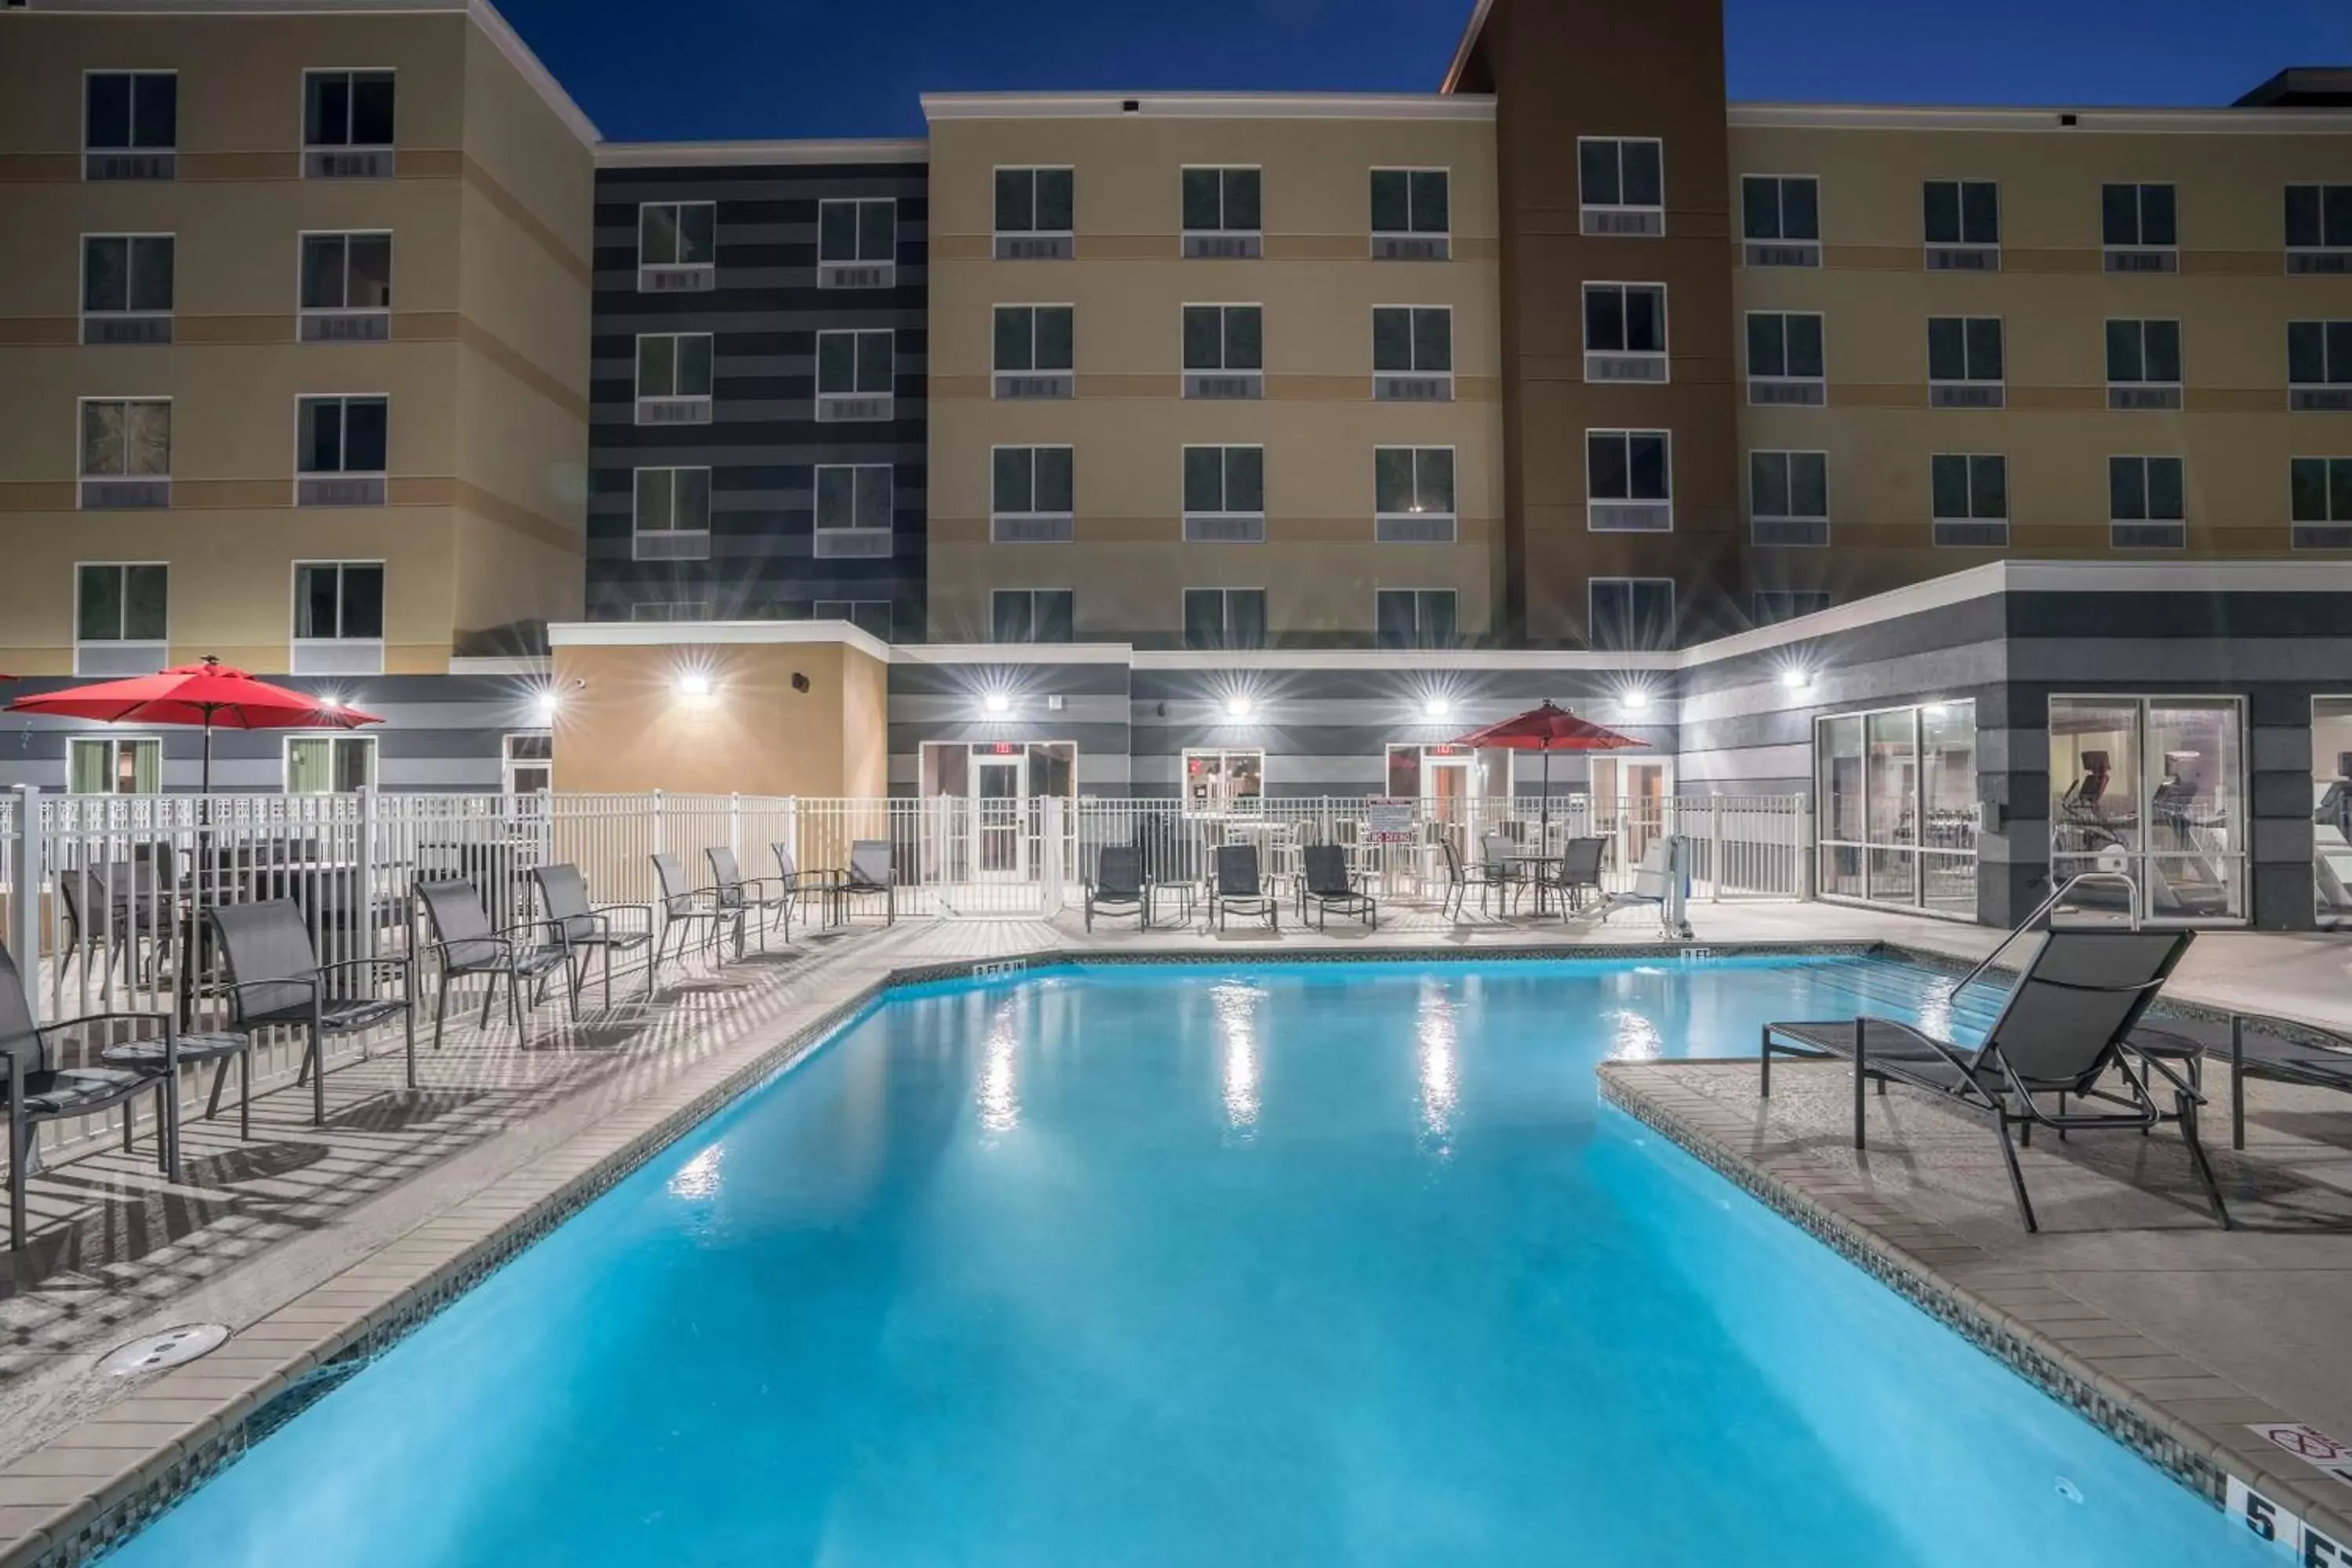 Swimming Pool in Fairfield Inn & Suites by Marriott Gainesville I-75